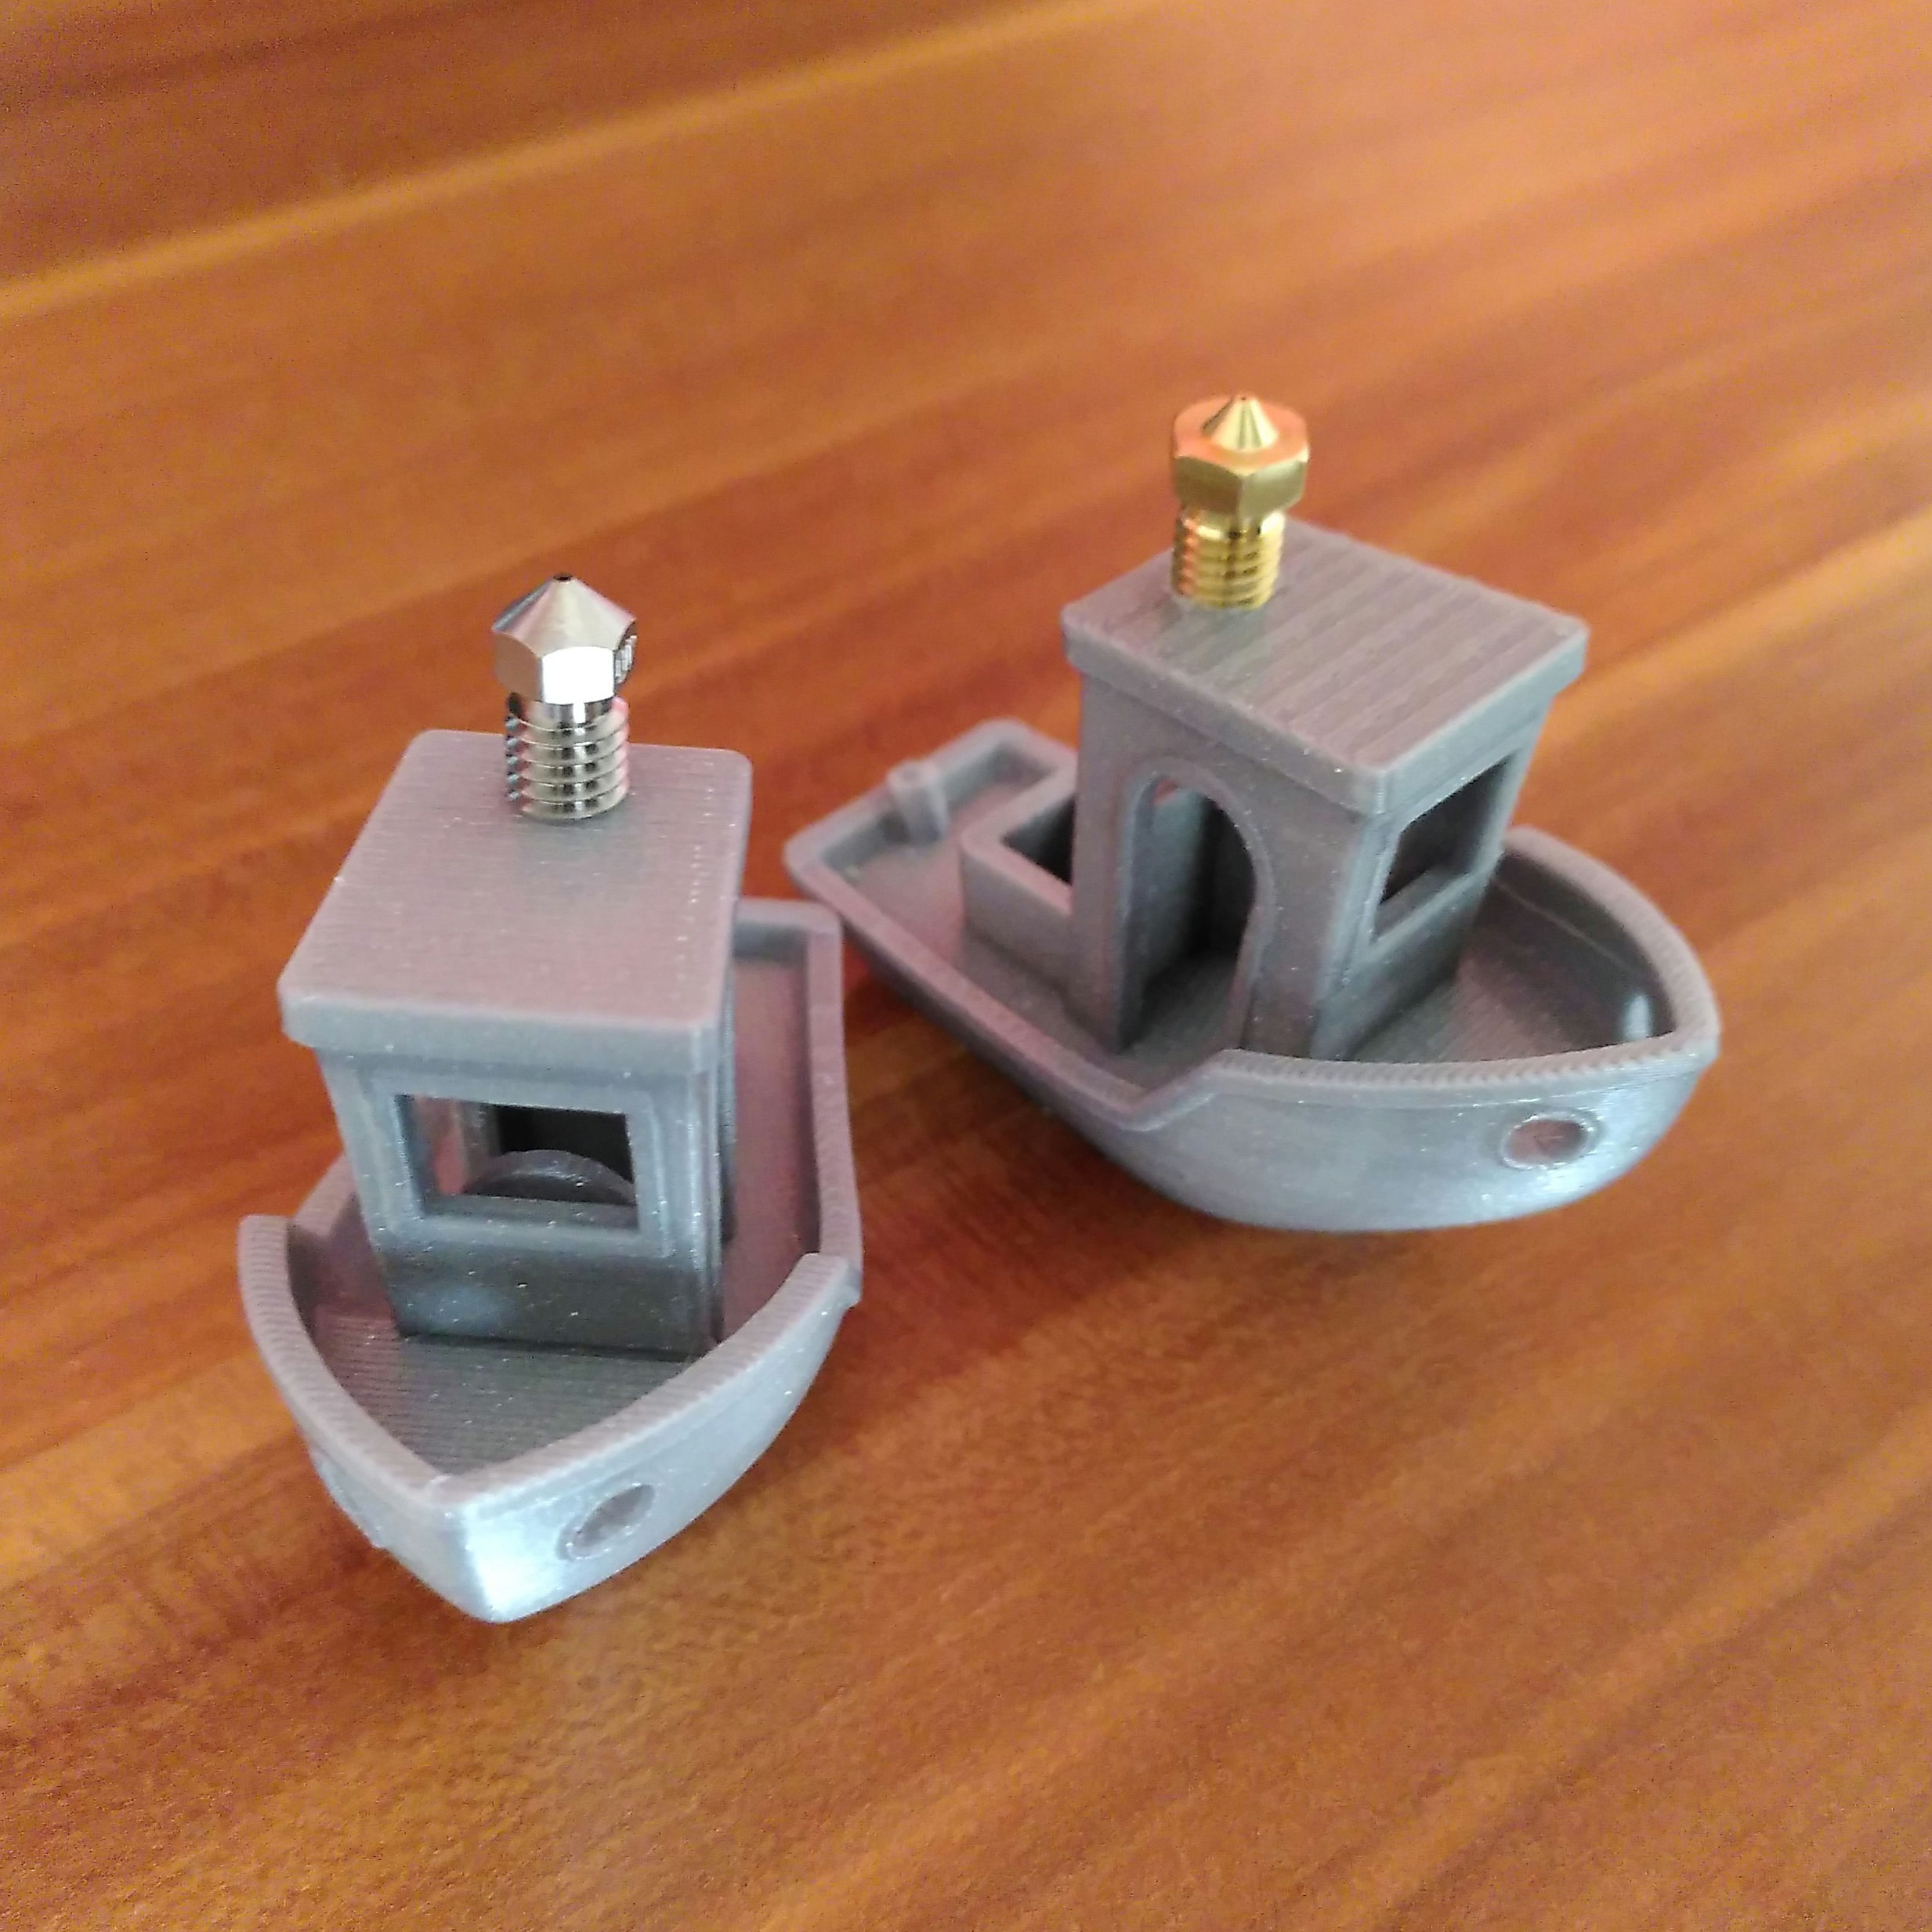 3DBenchy with Nozzle Chimney